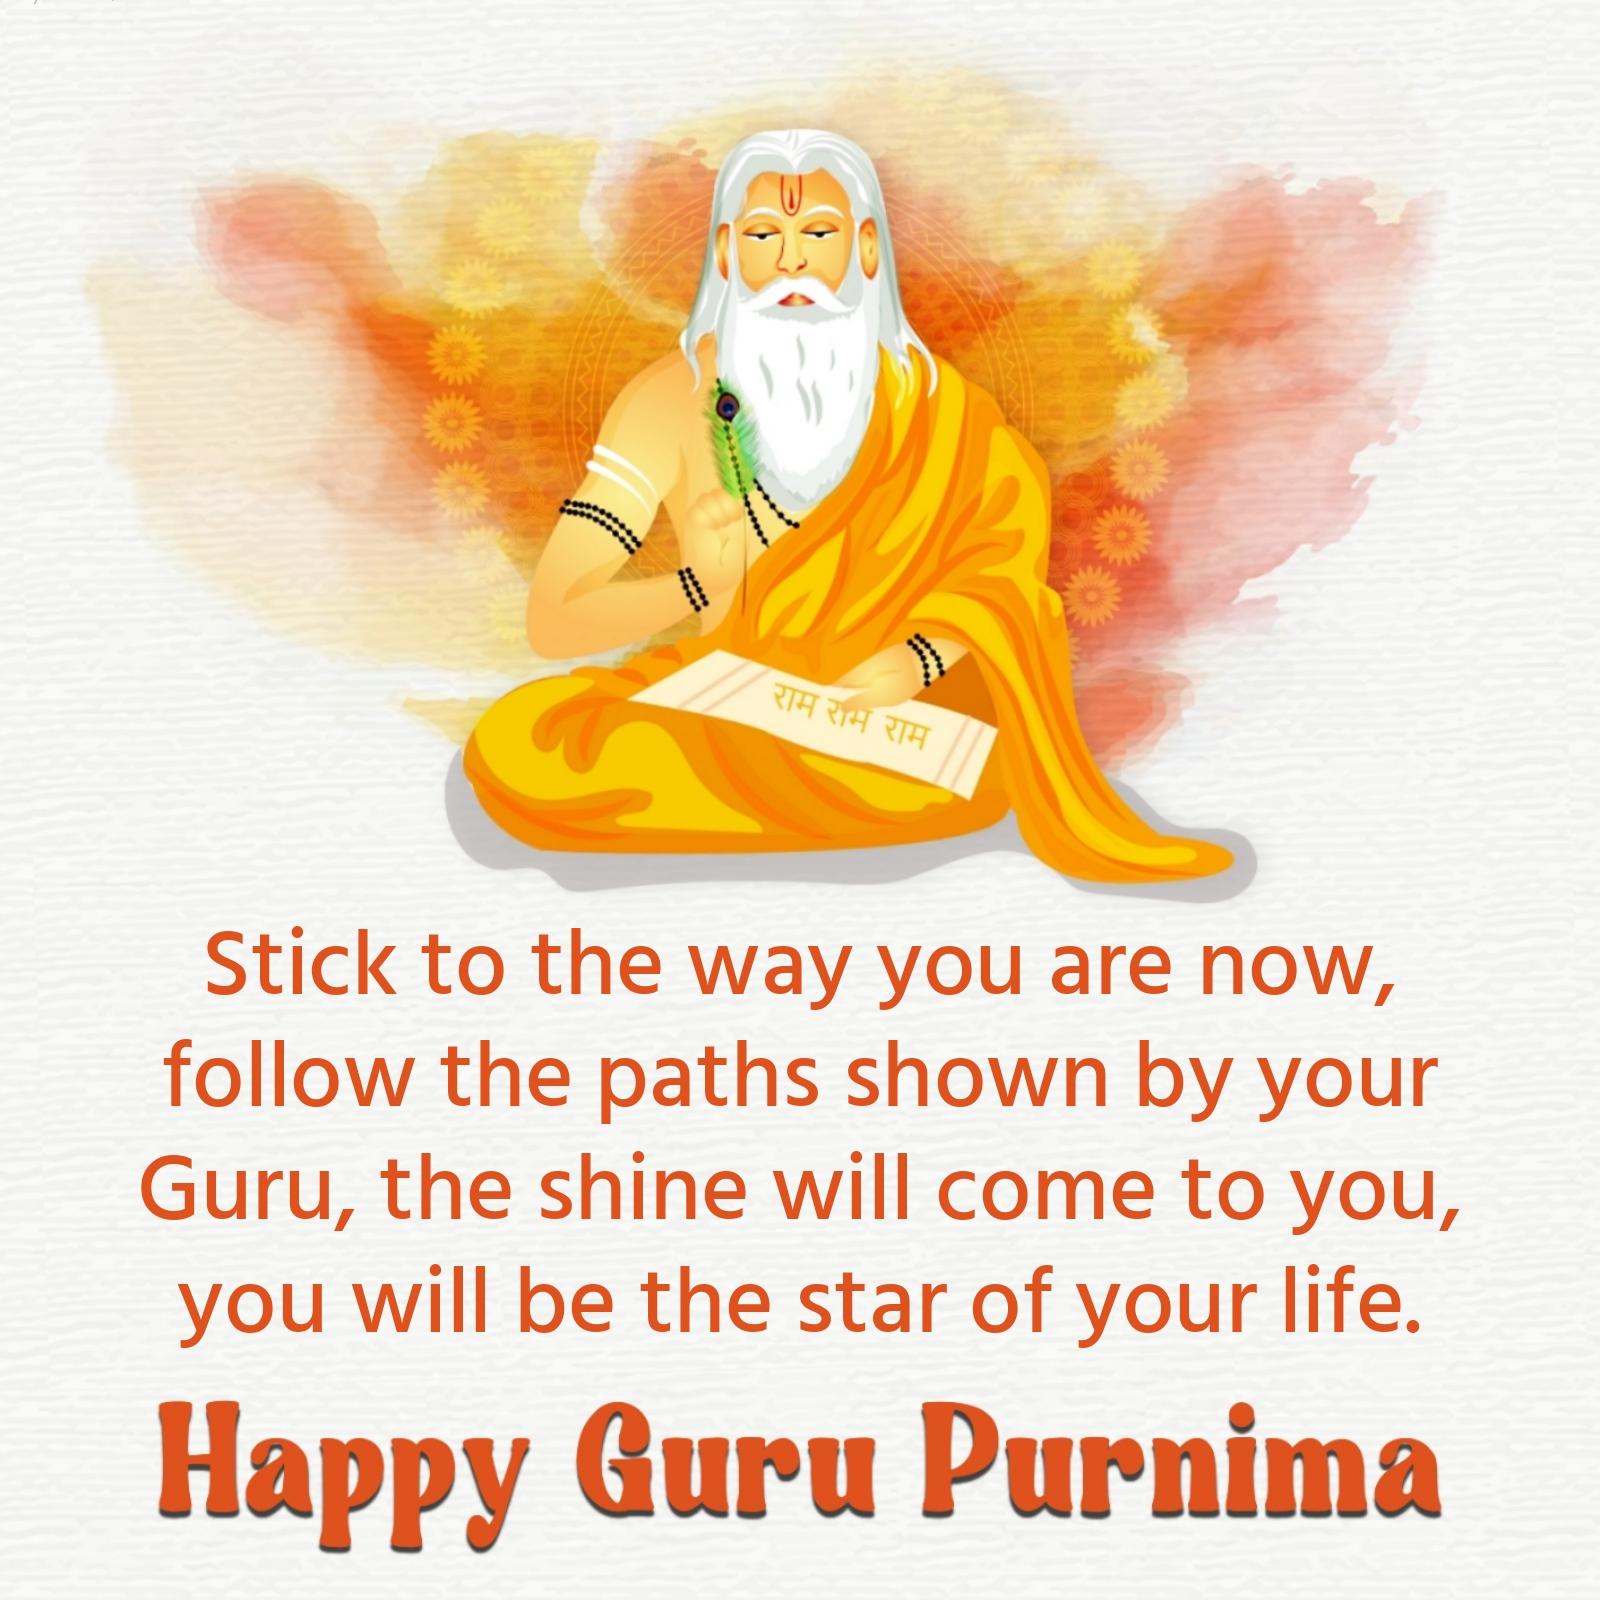 Stick to the way you are now follow the paths shown by your Guru